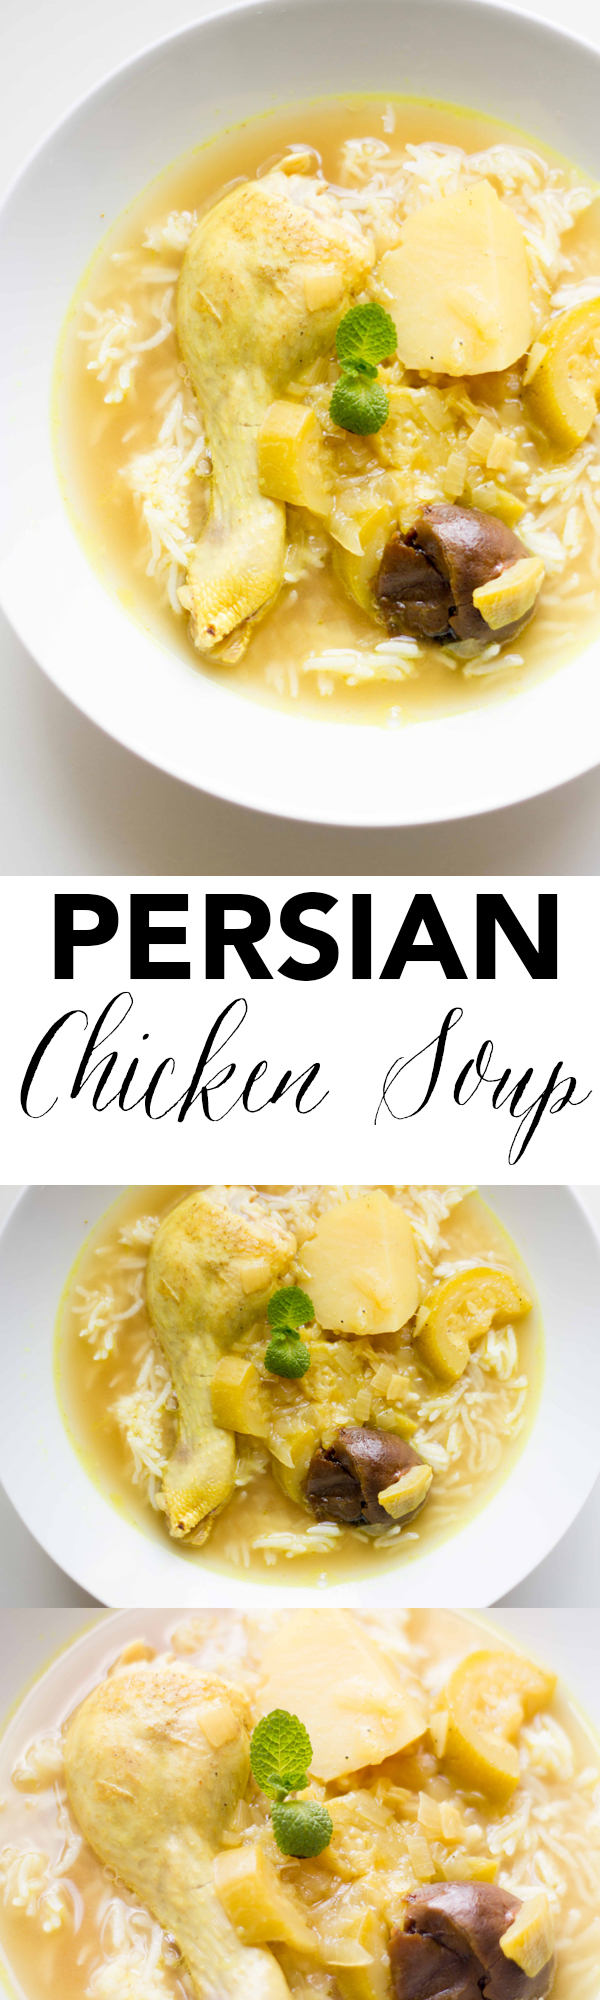 This traditional Persian Chicken Soup recipe is set apart with the addition of dried Persian limes, tangy, sour and delicious! www.seriousspice.com 